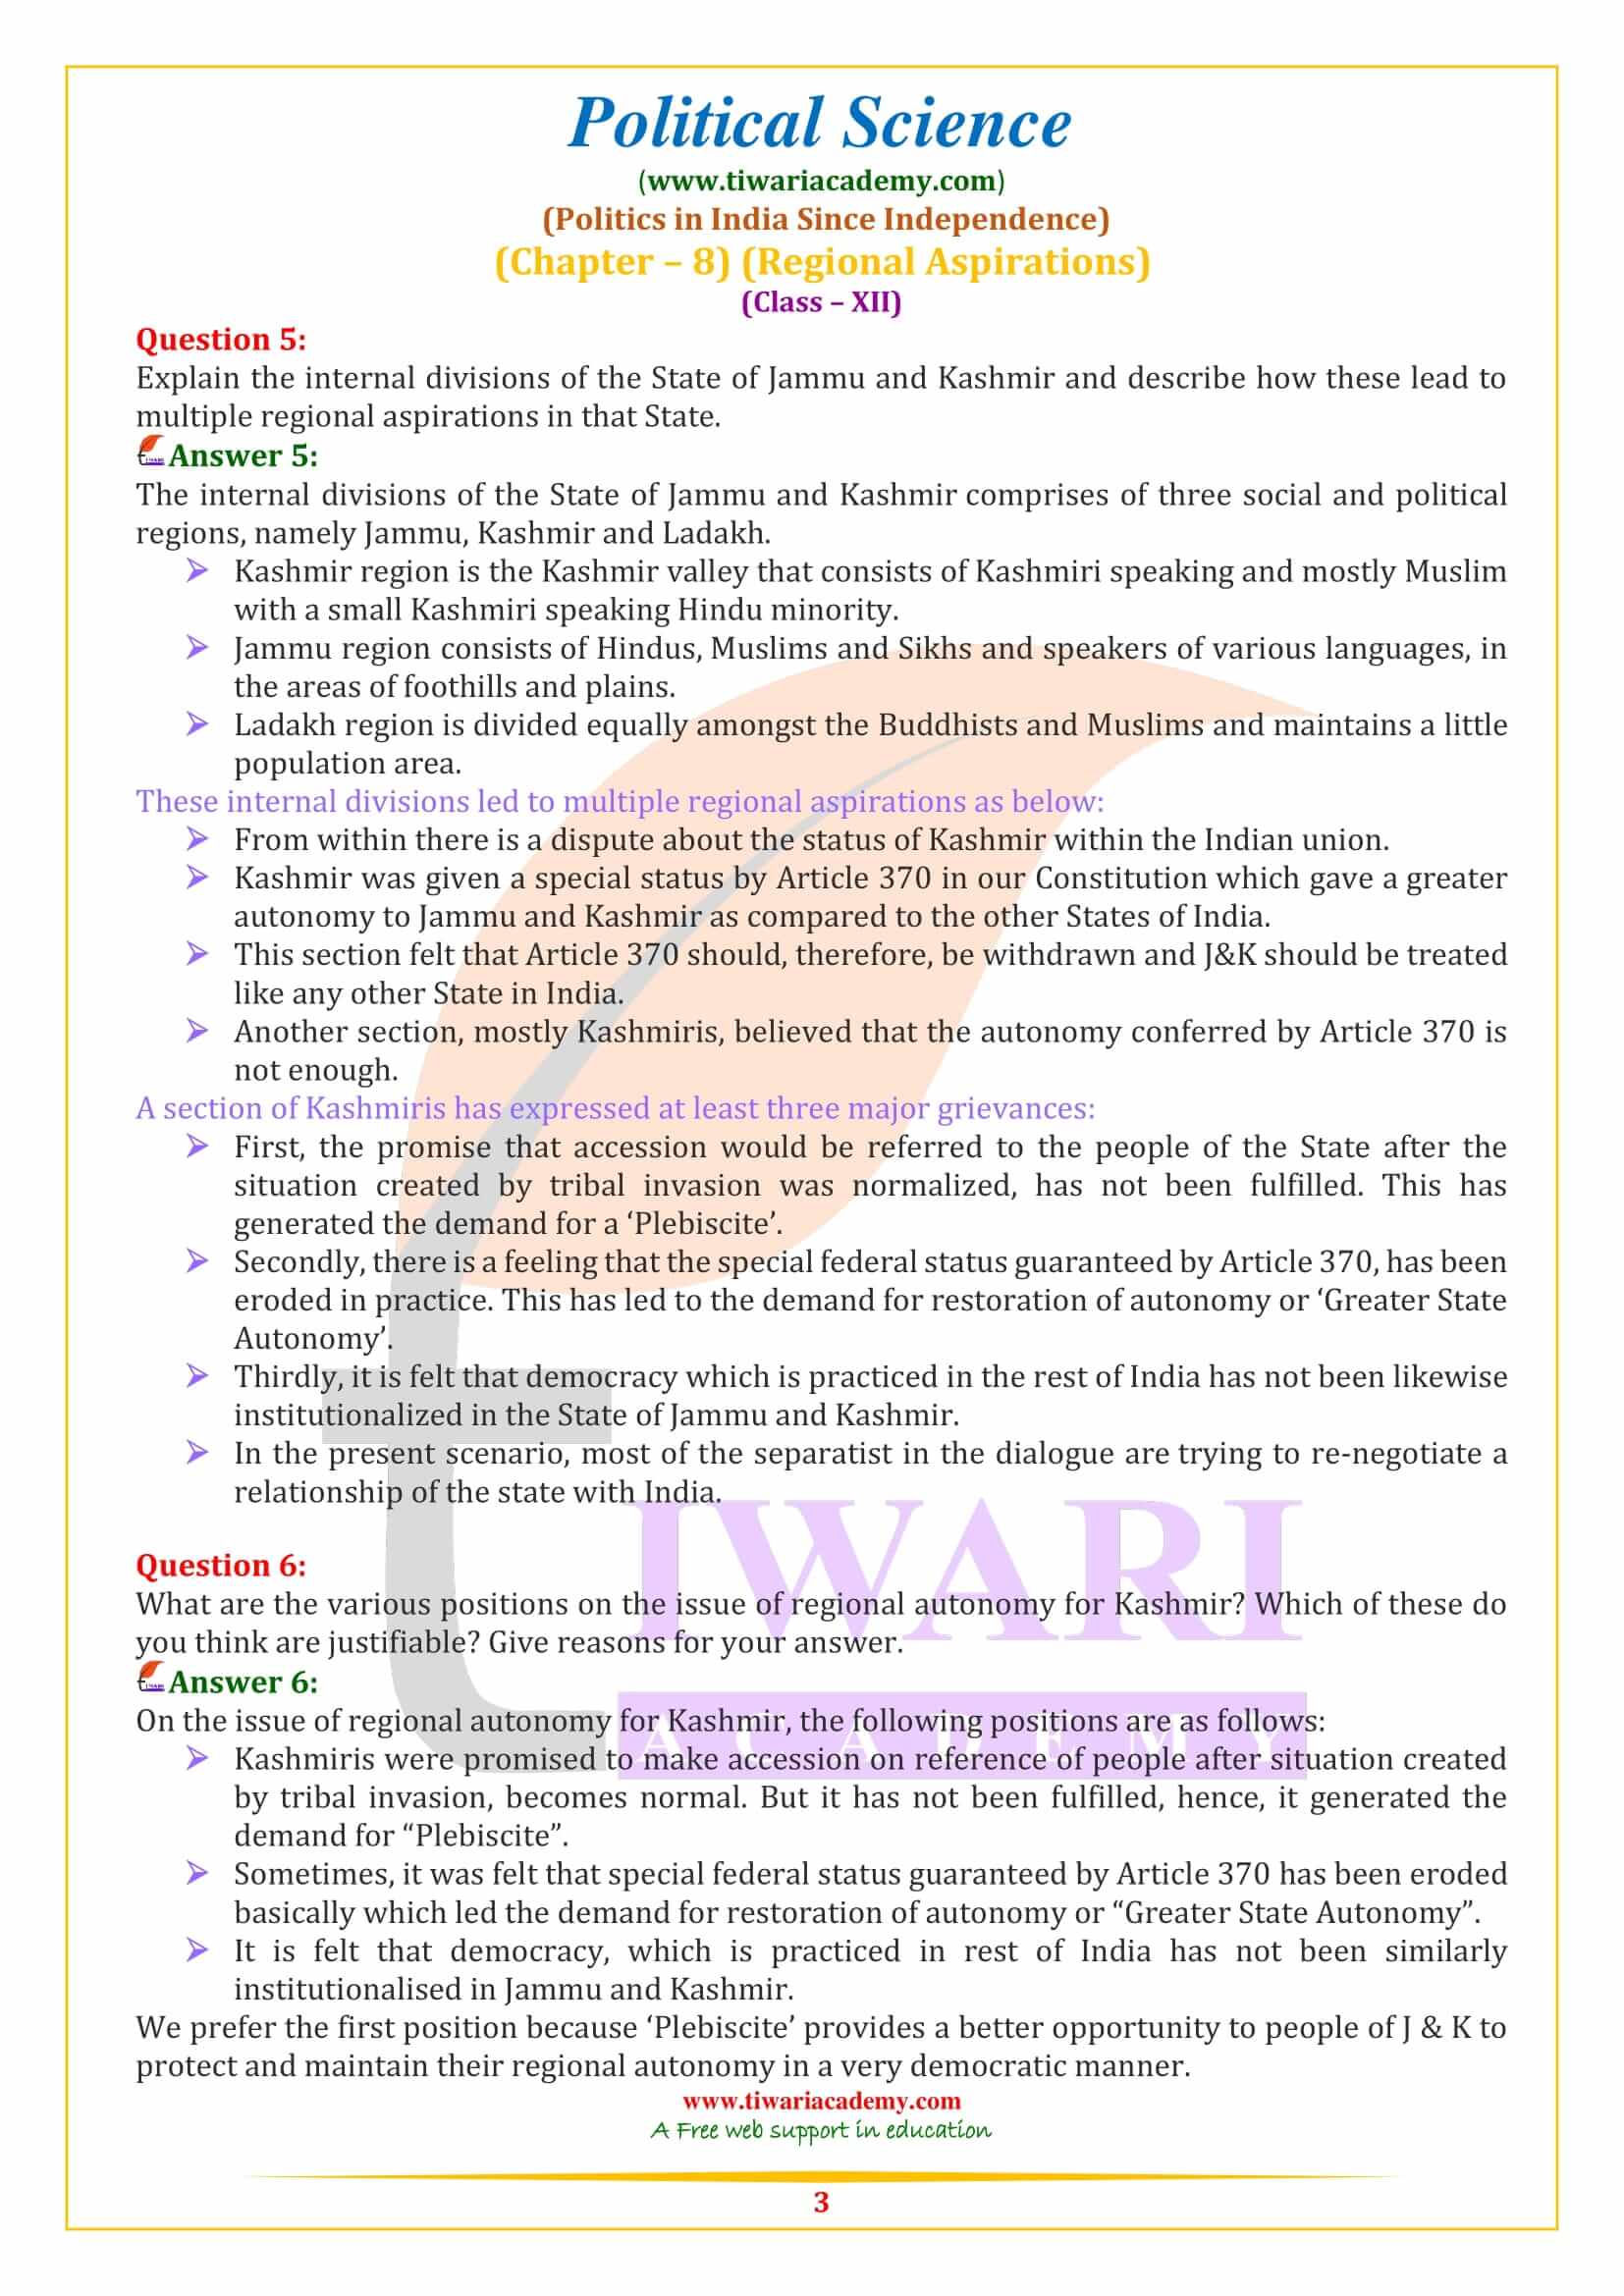 NCERT Solutions for Class 12 Political Science Part 2 Chapter 8 in English Medium